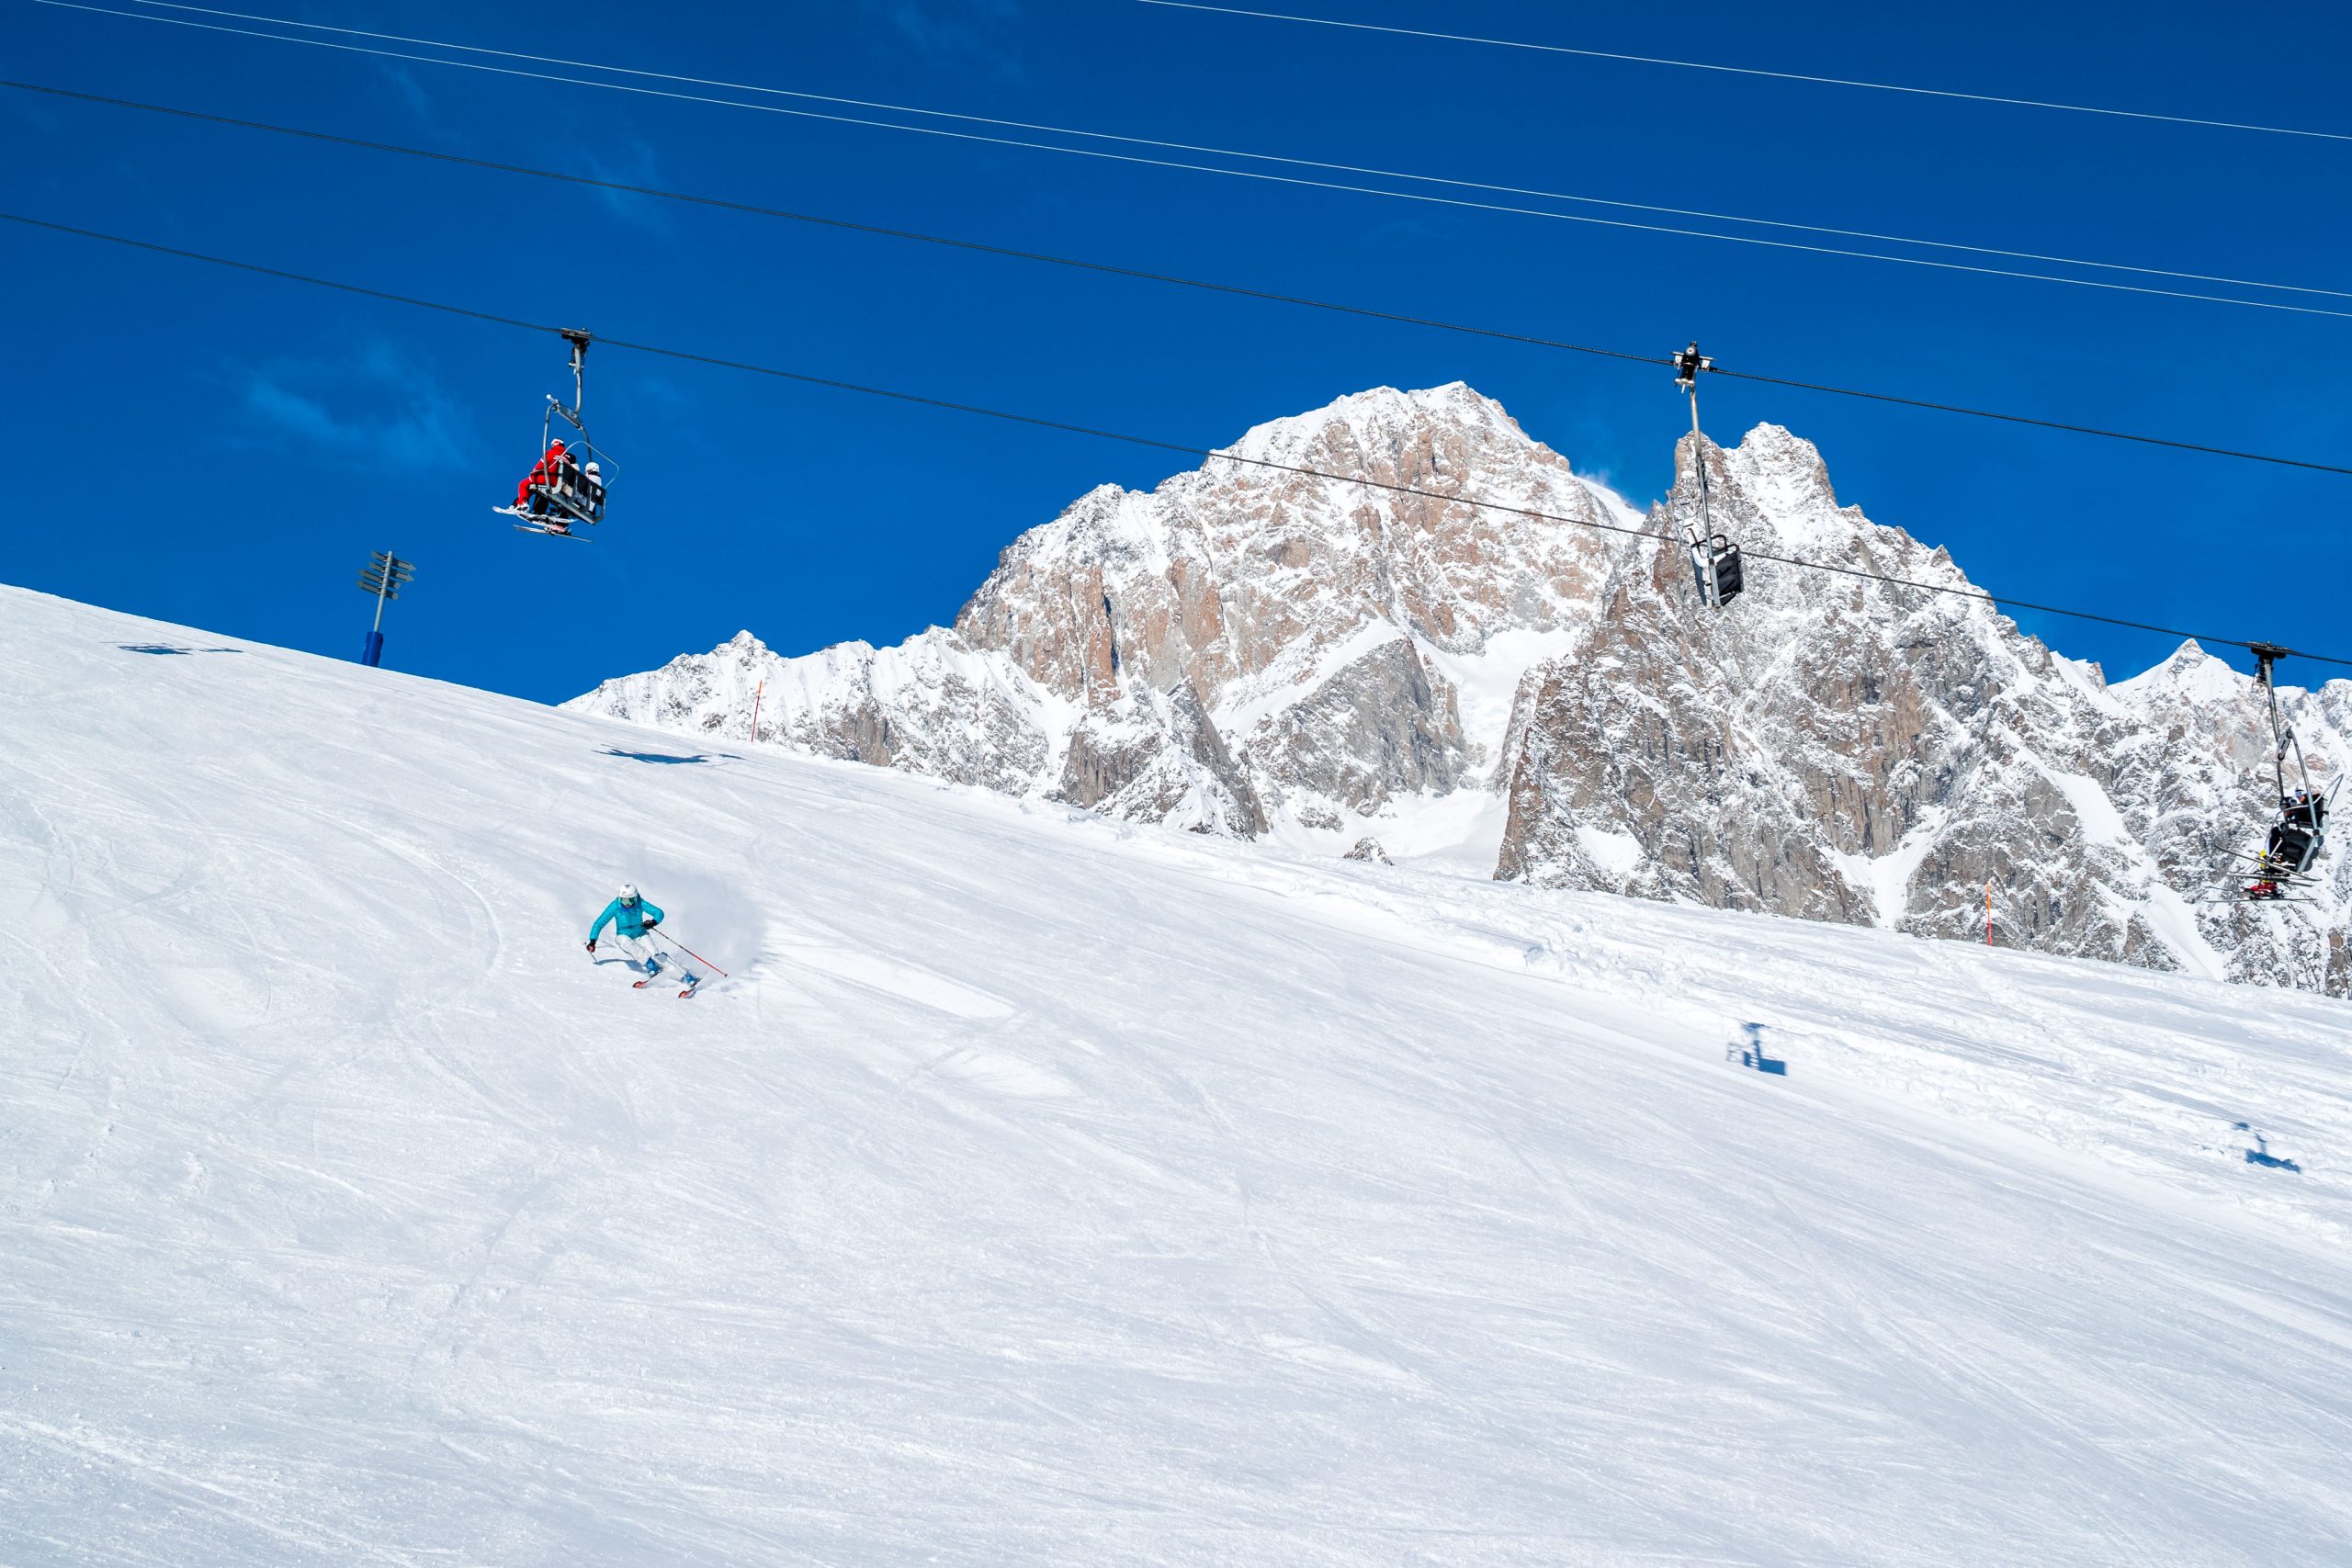 ALPINE SKIING
The ultimate winter activity! Ski in the heart of the Alps with the breathtaking views of Mont Blanc: choose from 18 lifts and more than 33 ski slopes that are suitable for every level, from beginner to expert, for a limitless experience. Courmayeur offers perfectly groomed slopes and snow of exceptional quality, thanks in part to our snowmaking system that covers more than 80 percent of the area, guaranteeing top performance. Get ready for an exciting adventure on the slopes around Mont Blanc – it’s just the beginning.
Discover more
